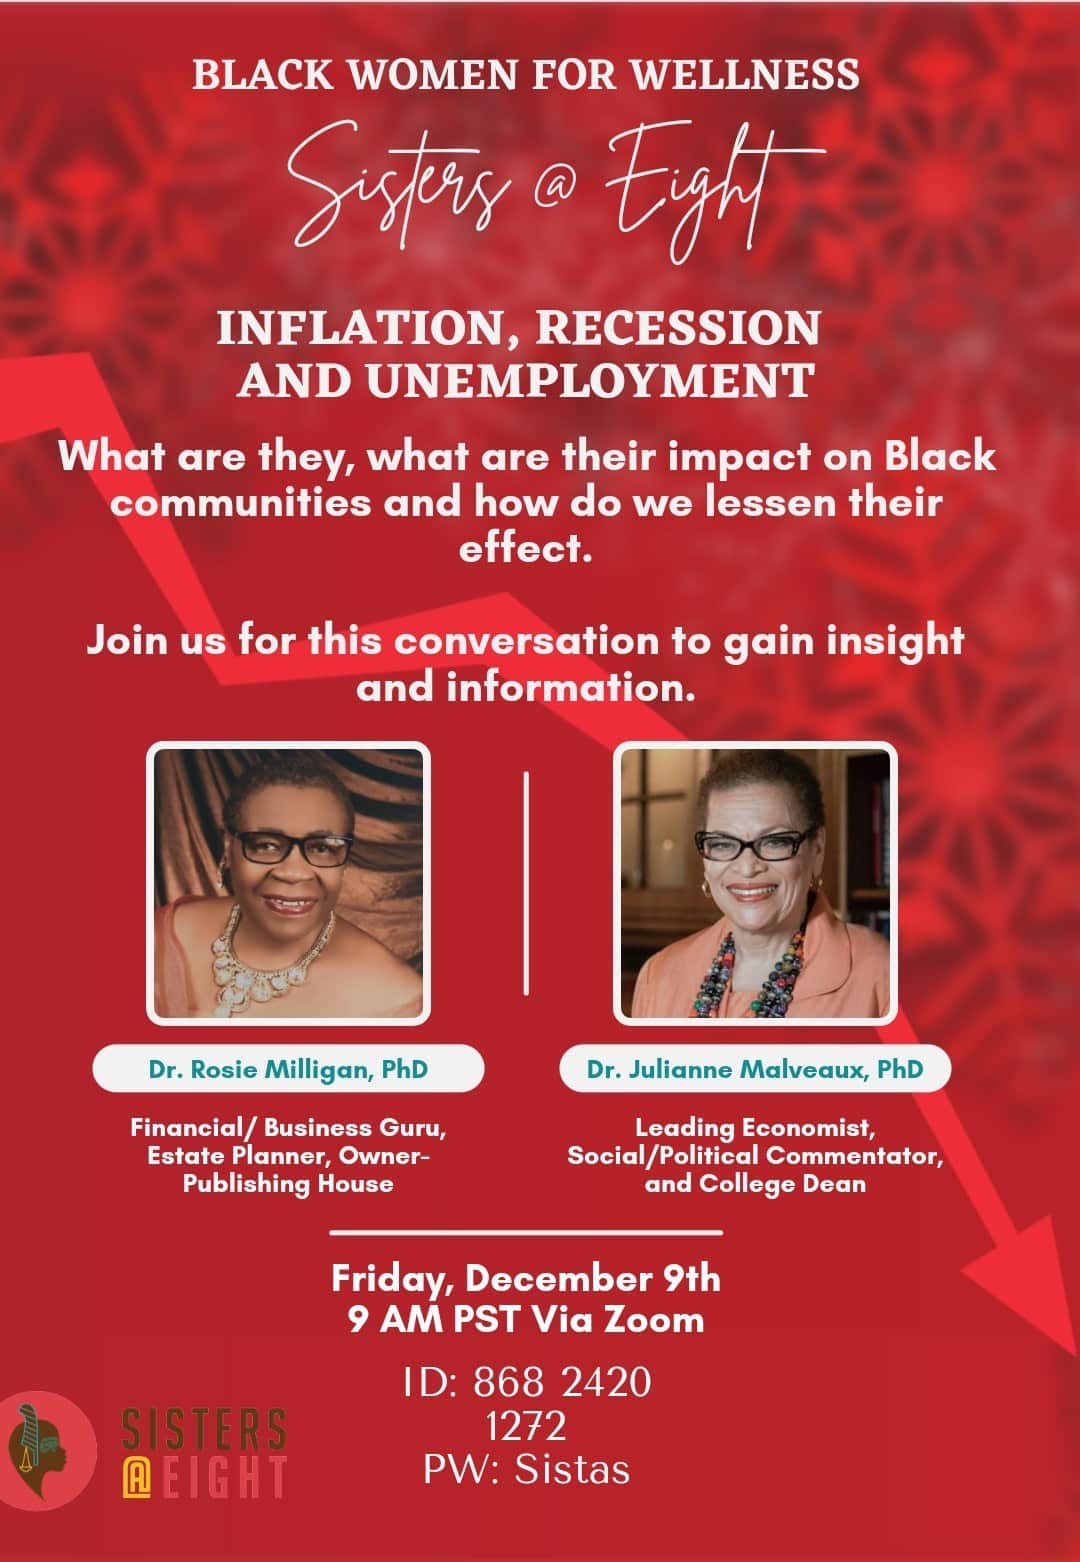 Sisters@Eight Inflation, Recession & Unemployment Event Flyer